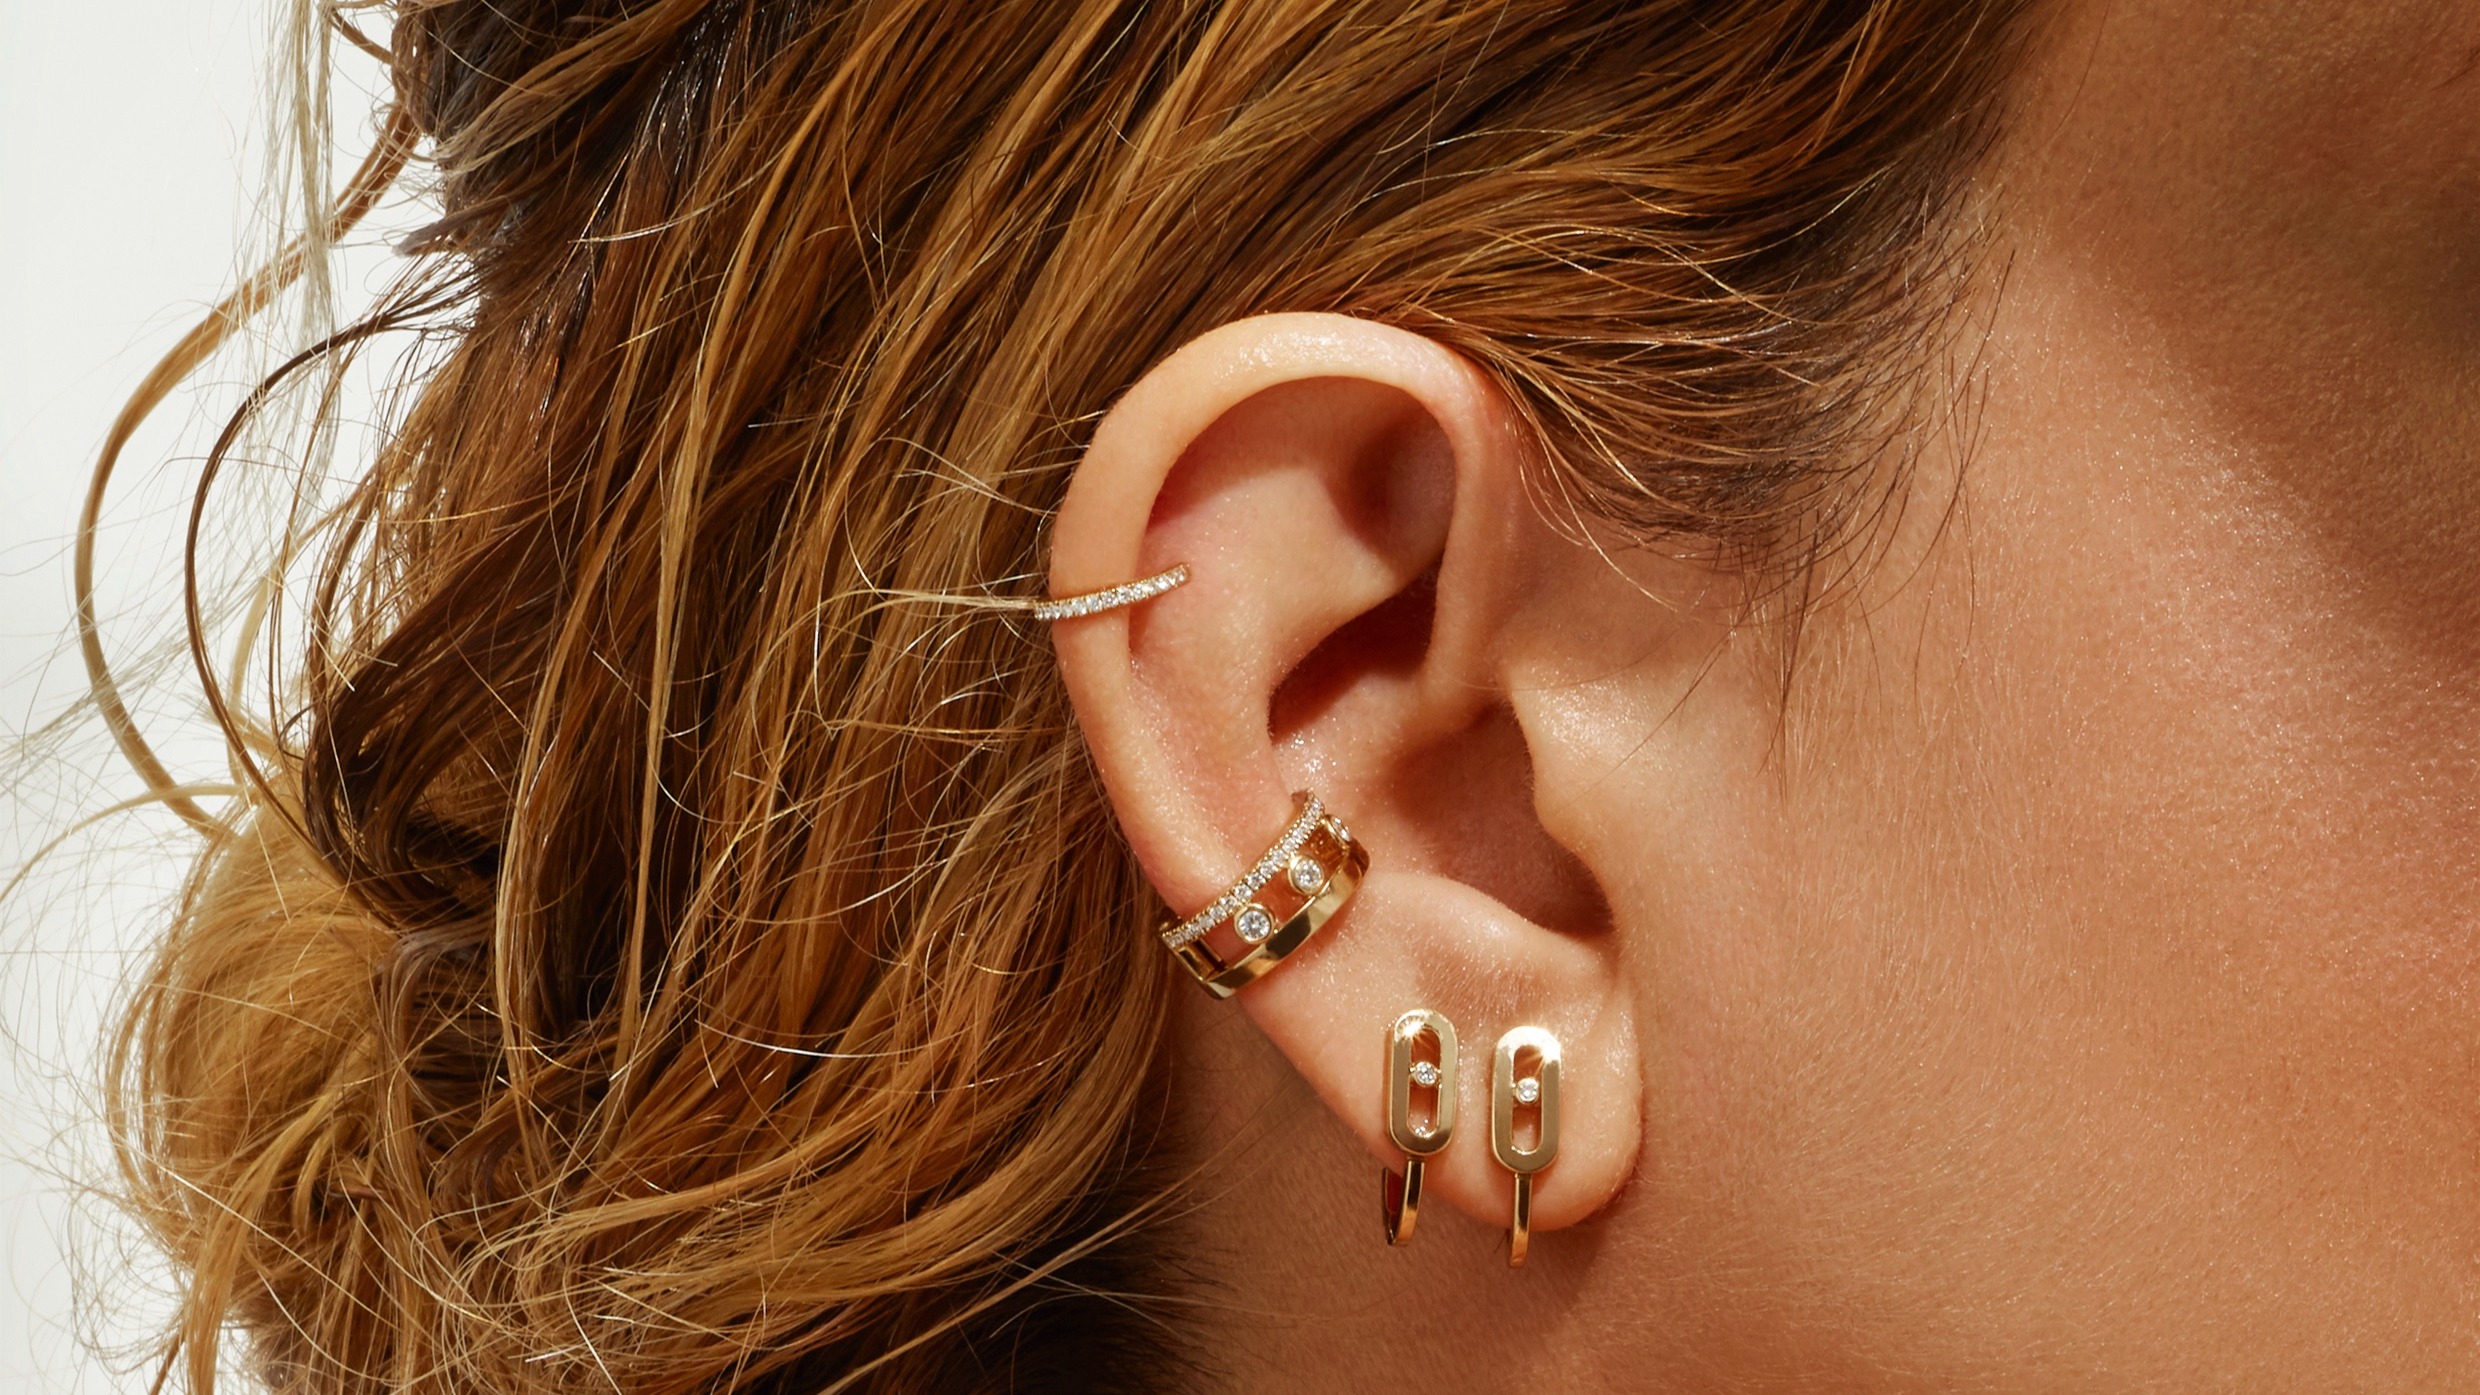 Statement earrings, without the piercings | Financial Times